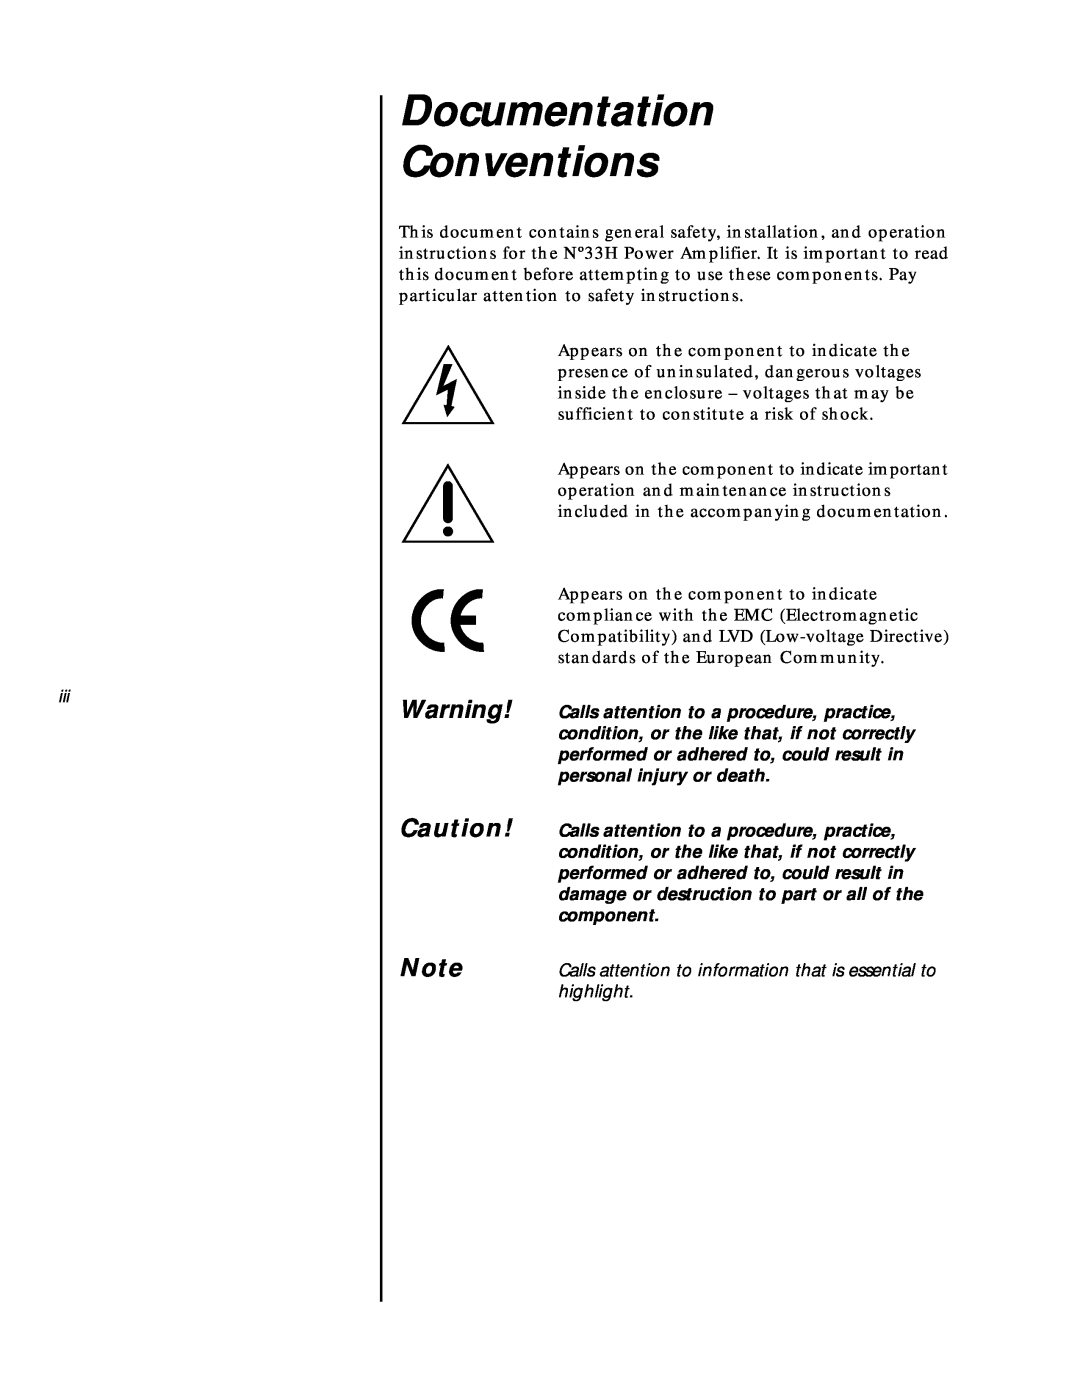 Mark Levinson N33H owner manual Documentation Conventions, highlight 